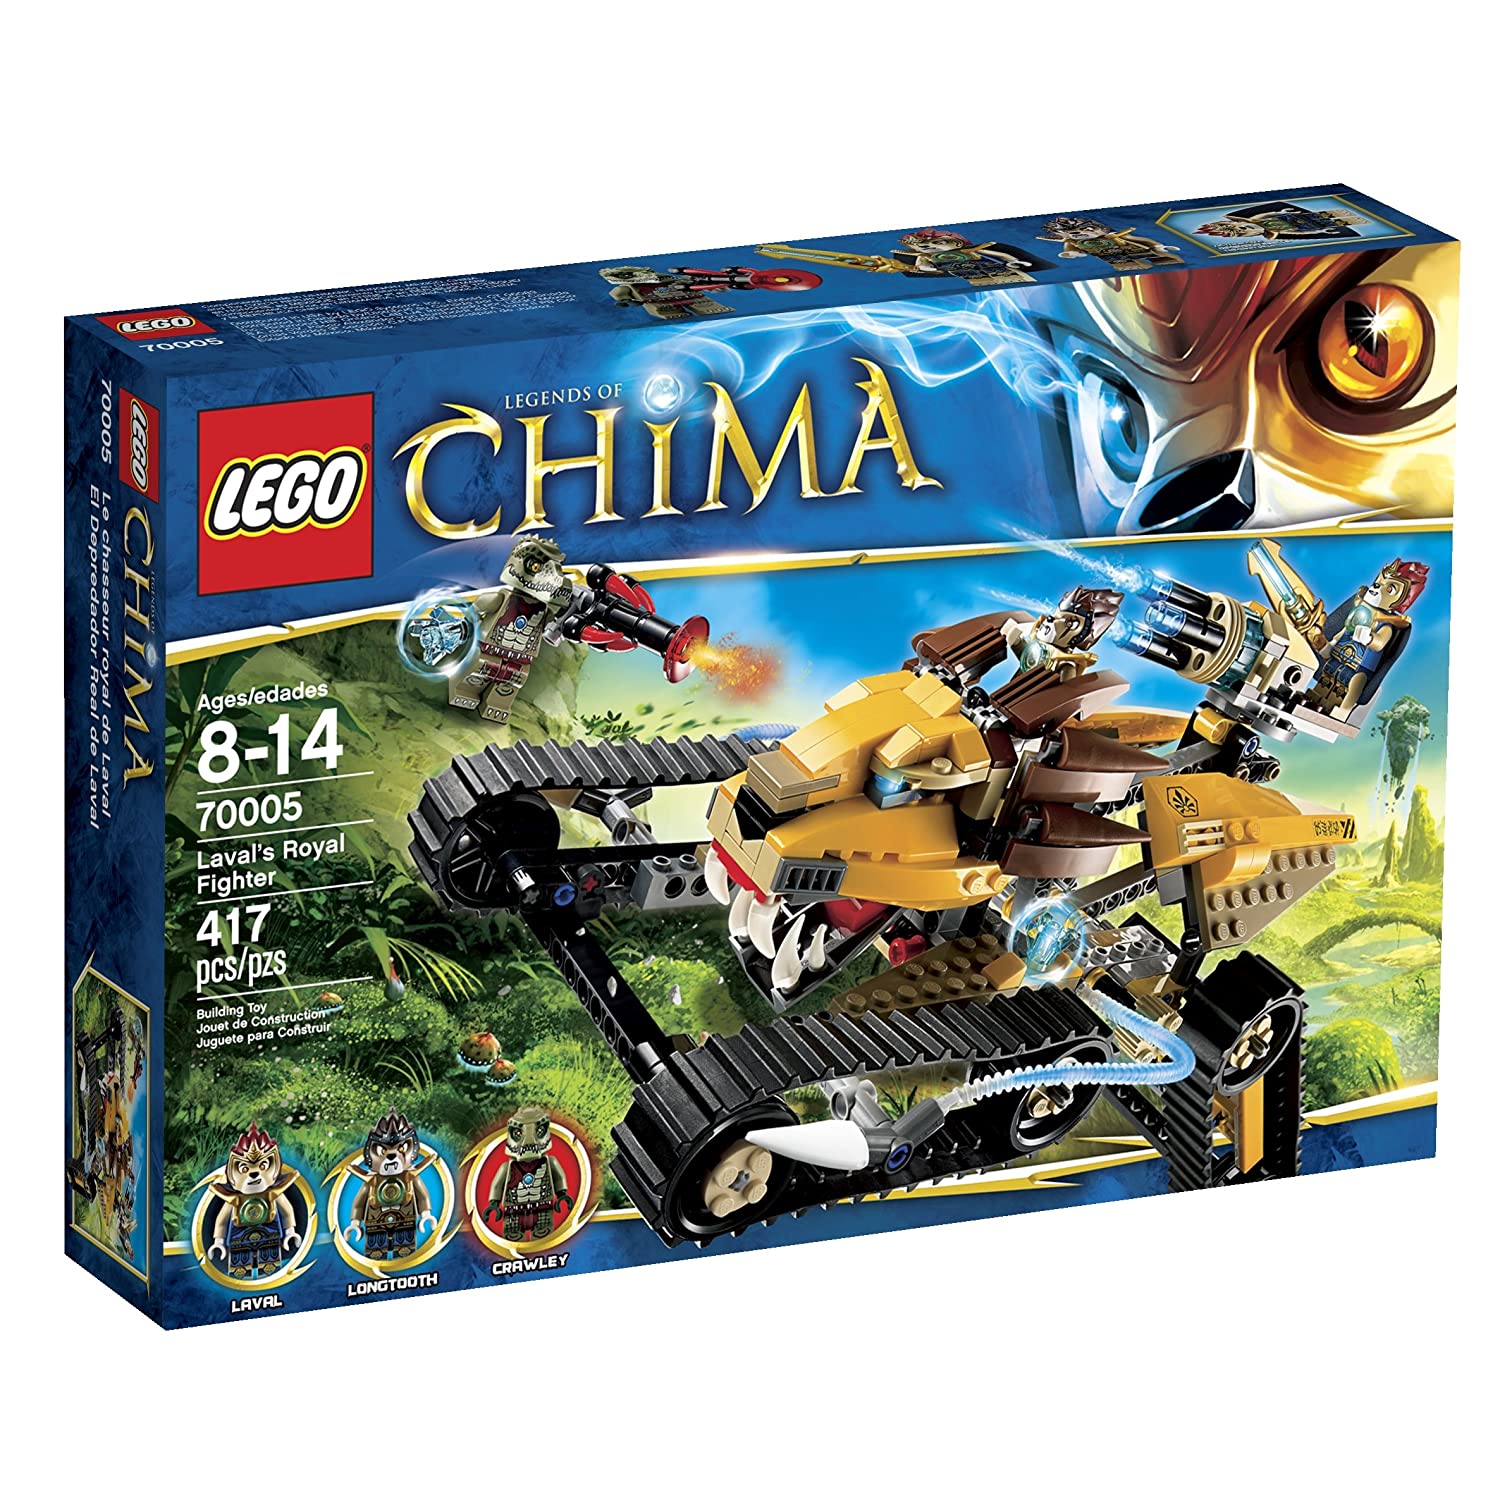 9 Best LEGO Chima Sets 2023 - Buying Guide & Reviews 7